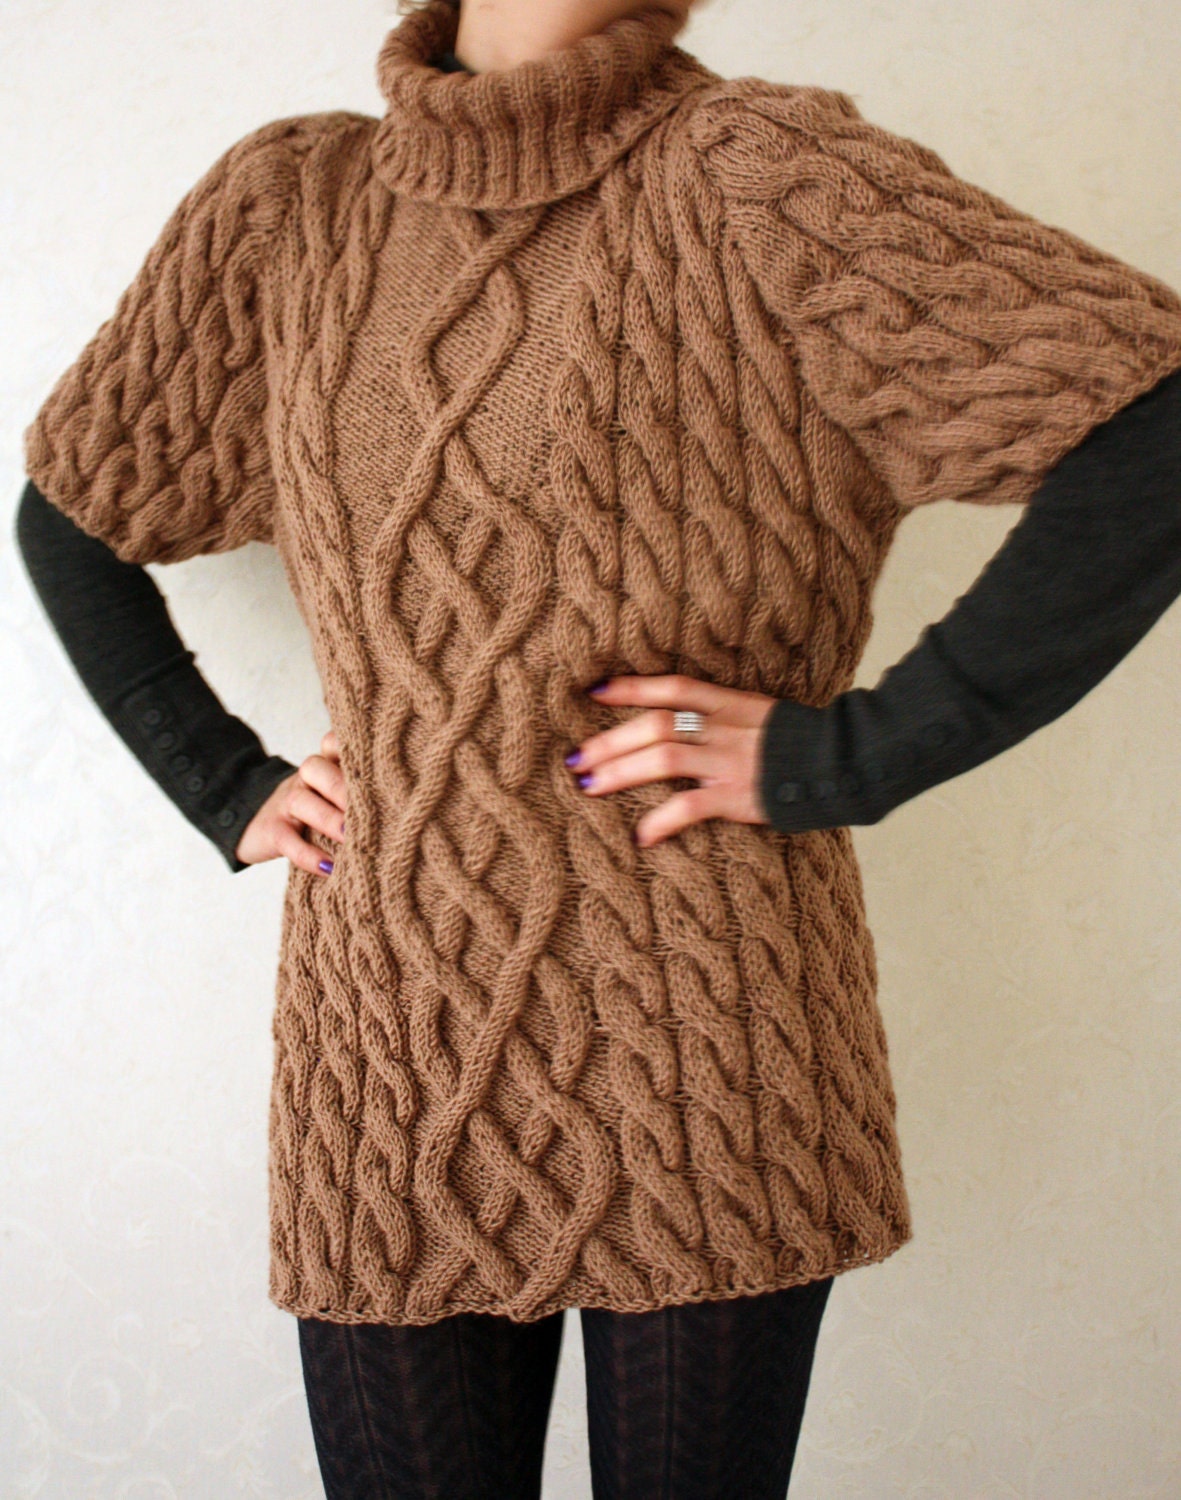 Items similar to Knitted dress in plait pattern-Hand Knit Sweater ...